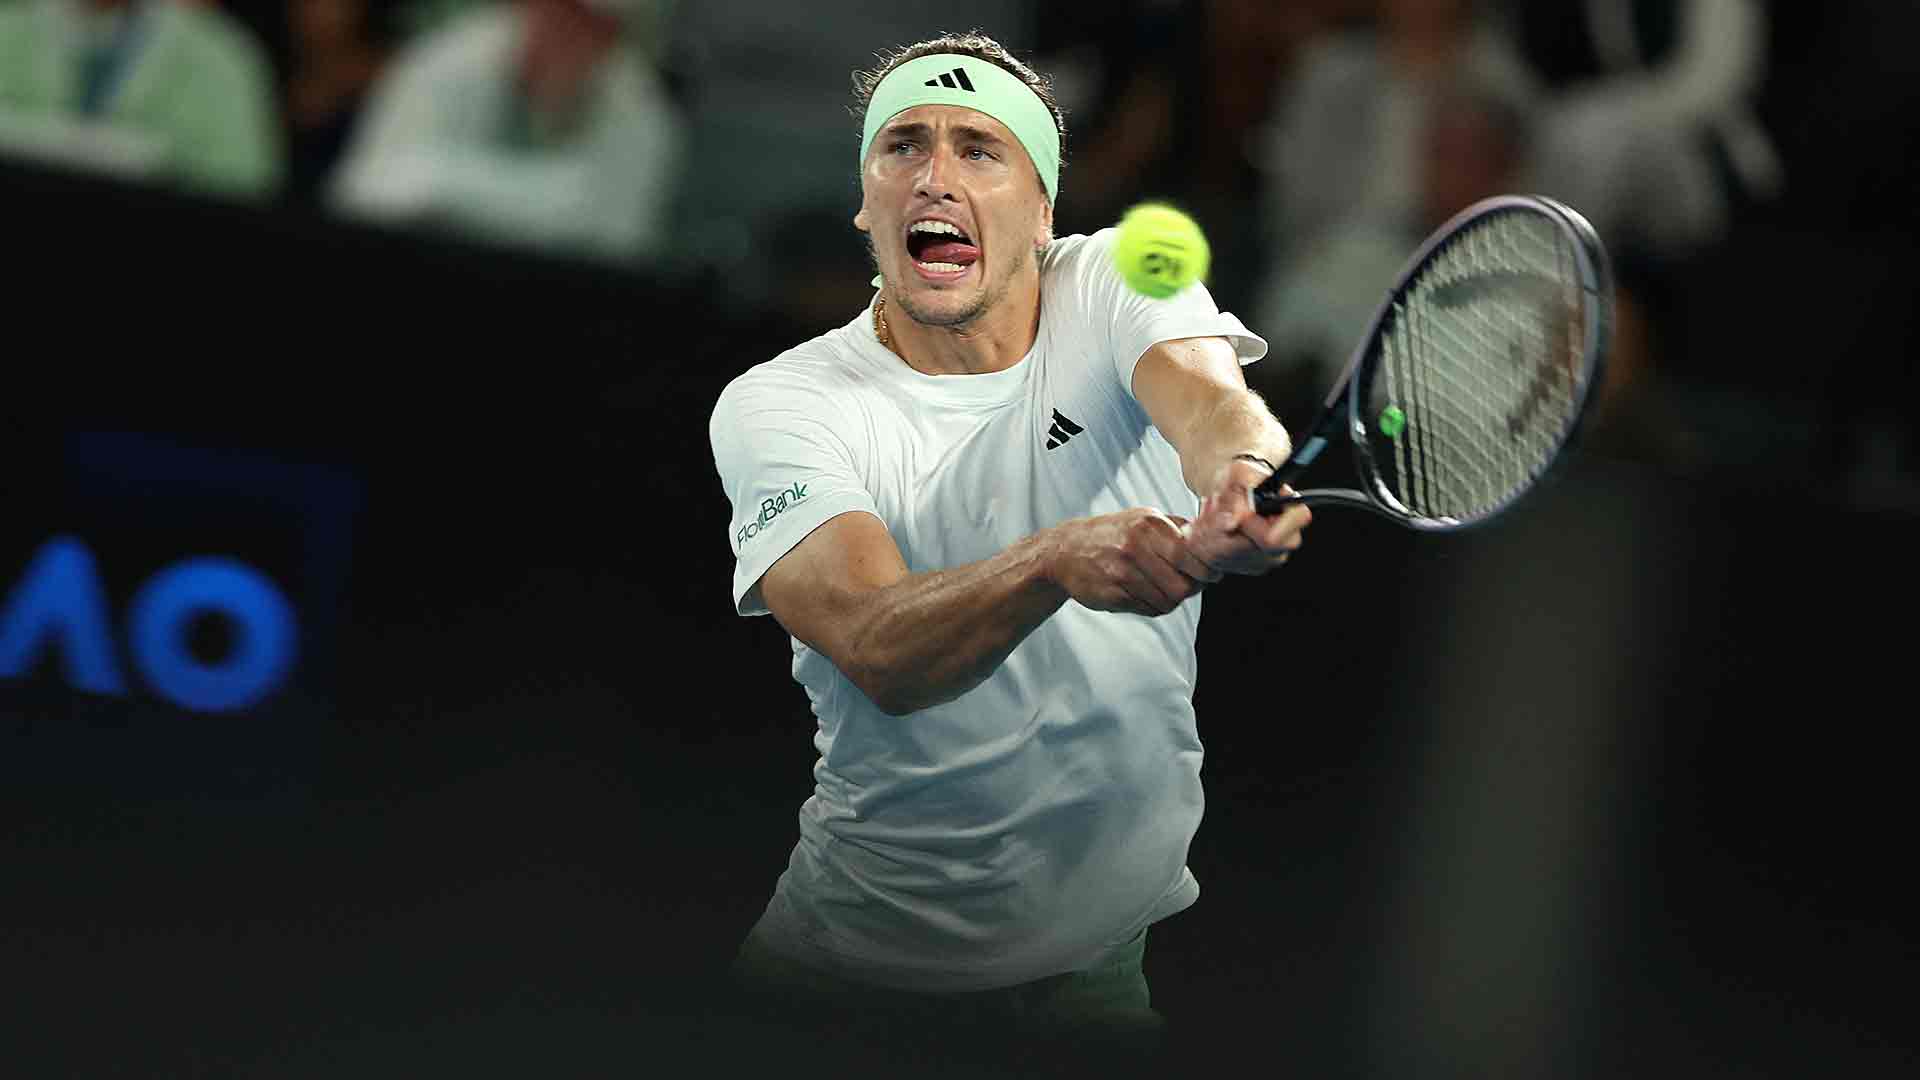 Alexander Zverev faced Carlos Alcaraz for the eighth time in his career in the quarterfinals of the Australian Open.